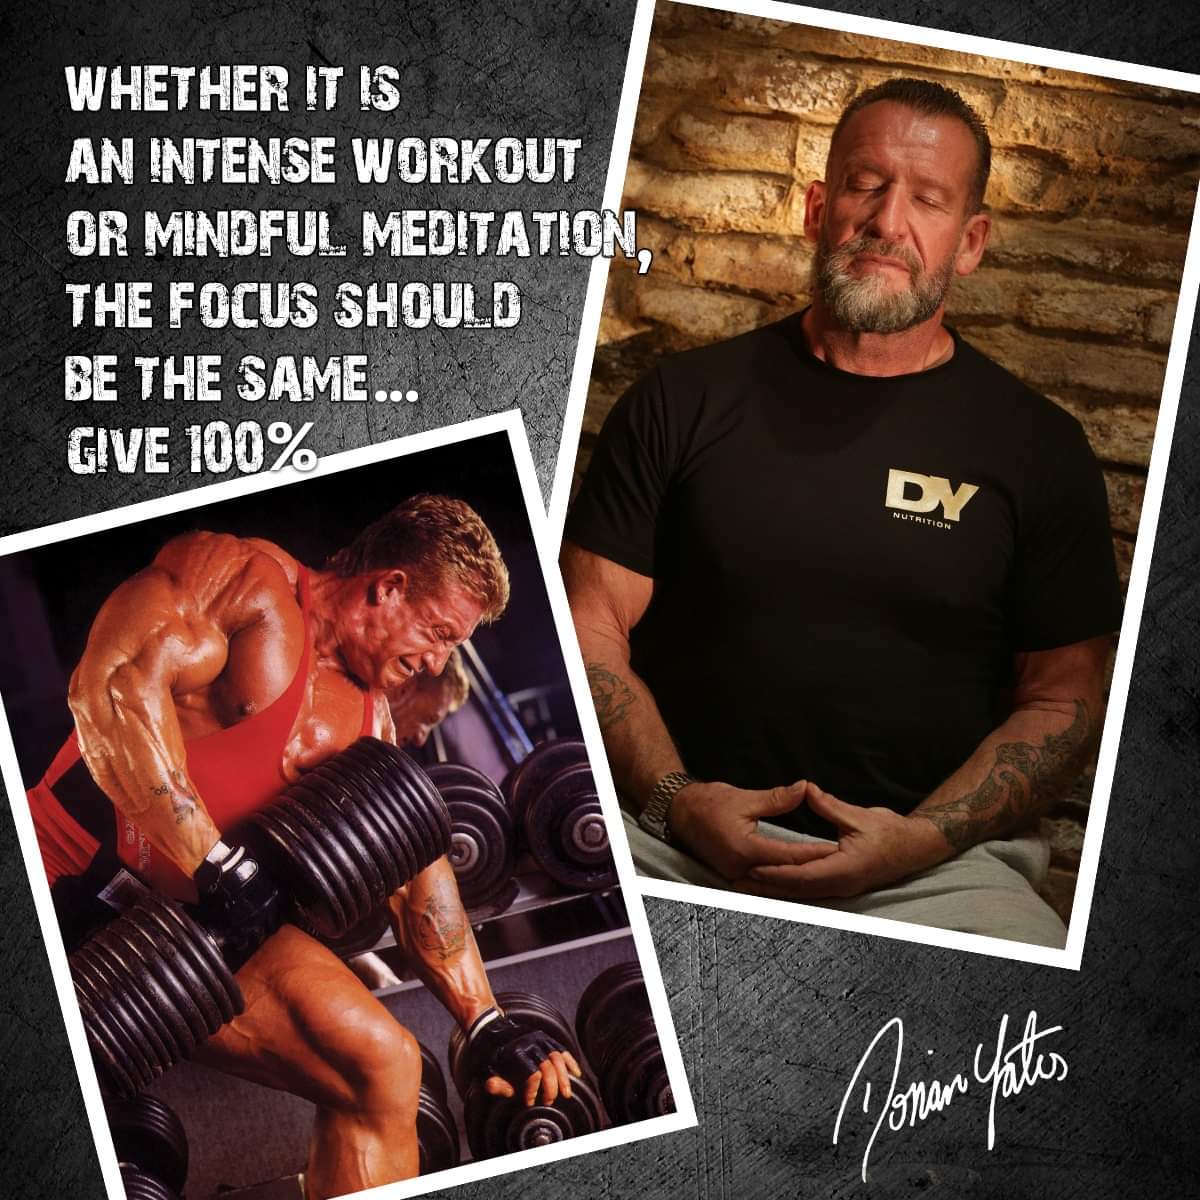 dorian yates motivation "wheter it is an intense workout or mindful meditation, the focus should be the same.. give 100%"